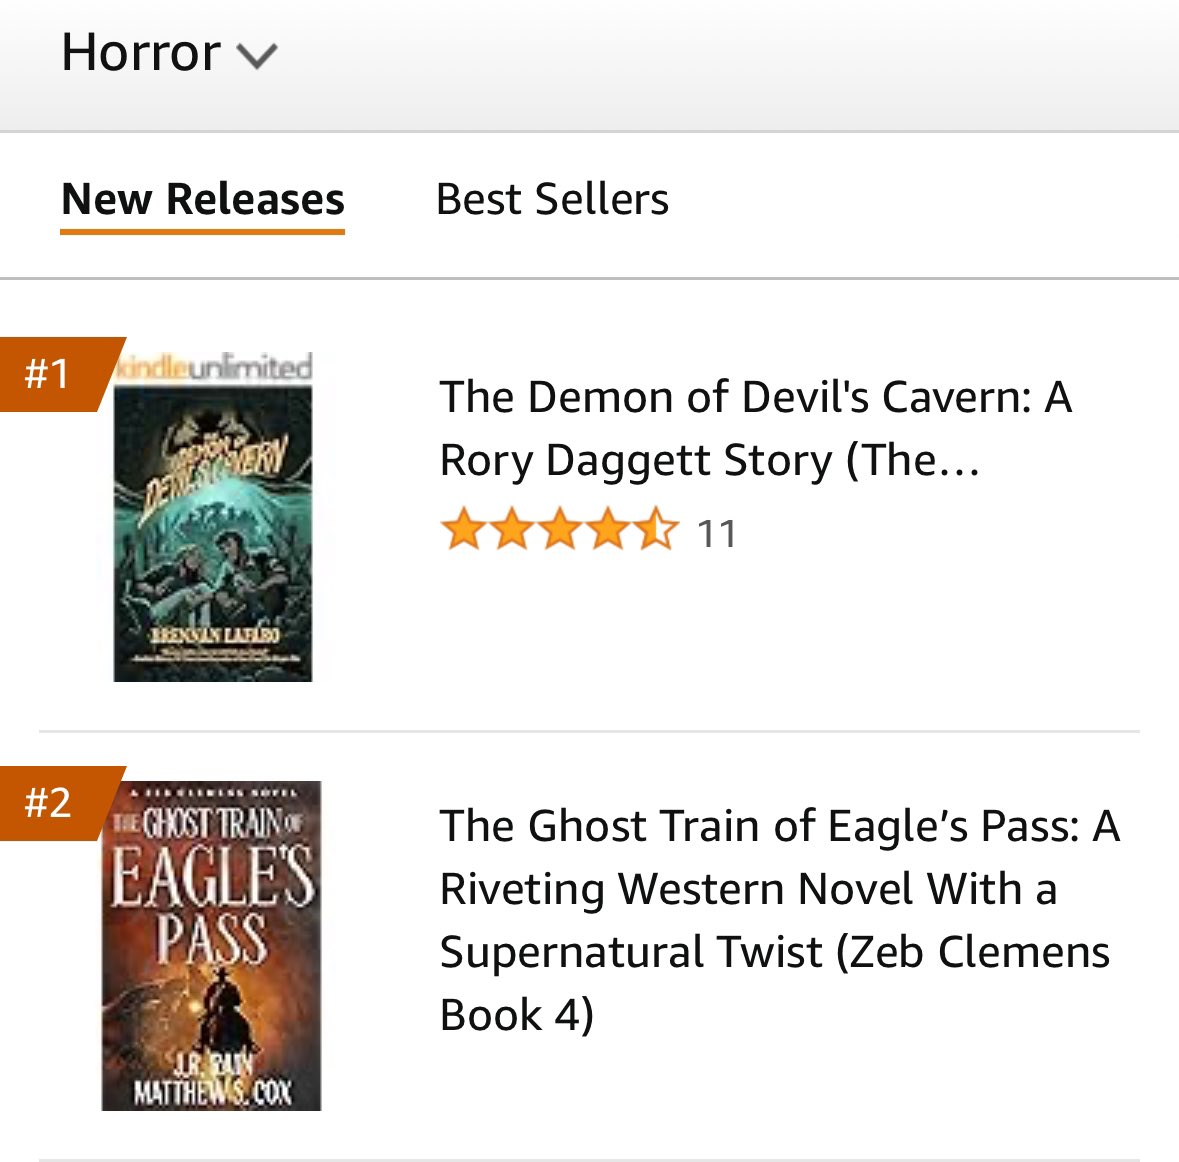 Hey hey hey! We did it! One more hop to number one before the river site no longer considers DoDC a new release. Huge thanks to everyone who gave it a push.